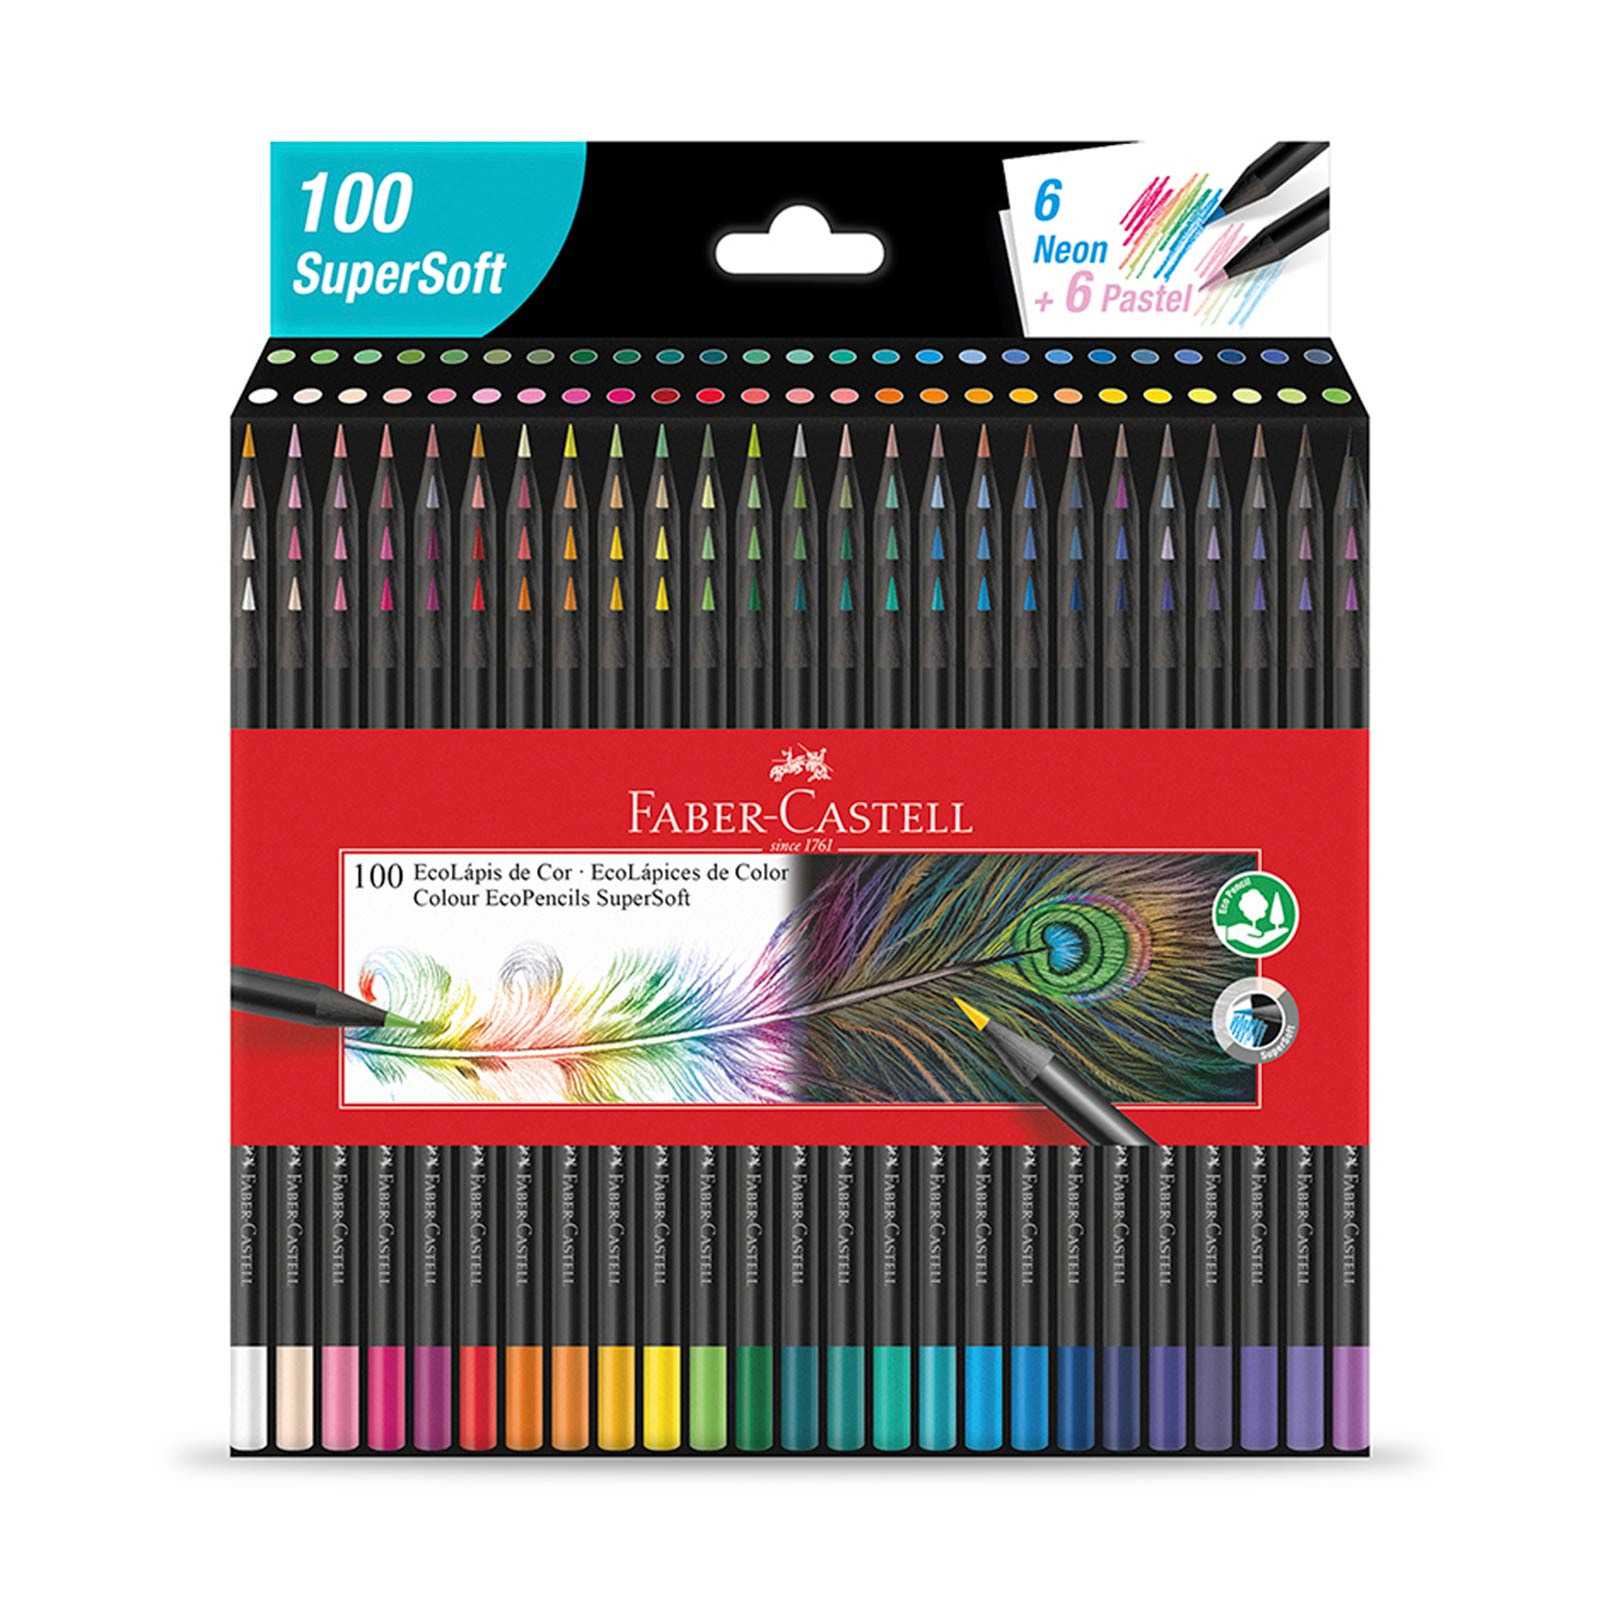 Colores Faber Castell Metalicos x 10